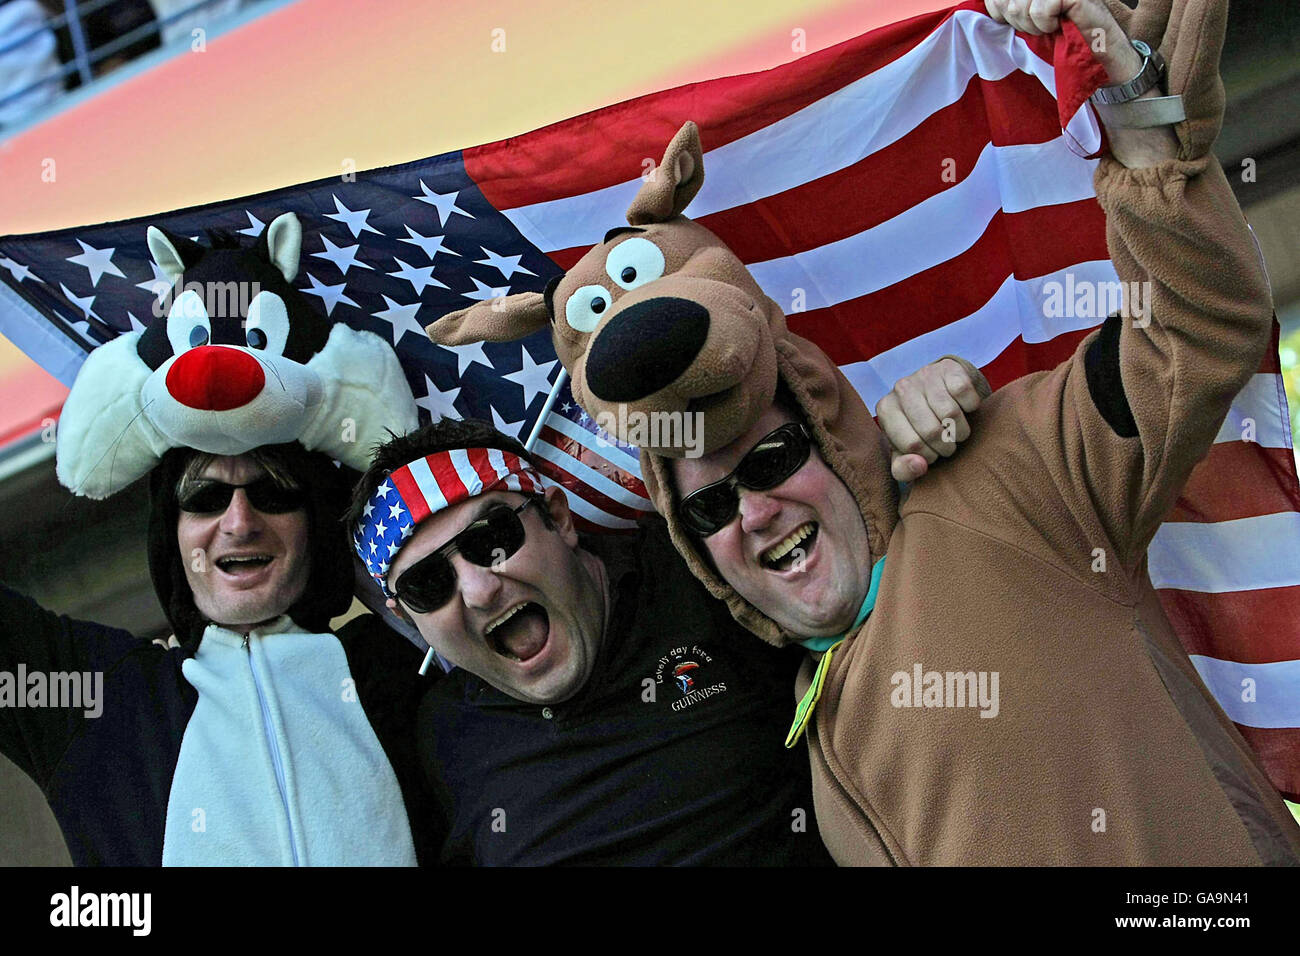 USA fans during the IRB Rugby World Cup match at Stade de la Mosson, Montpellier, France. Stock Photo